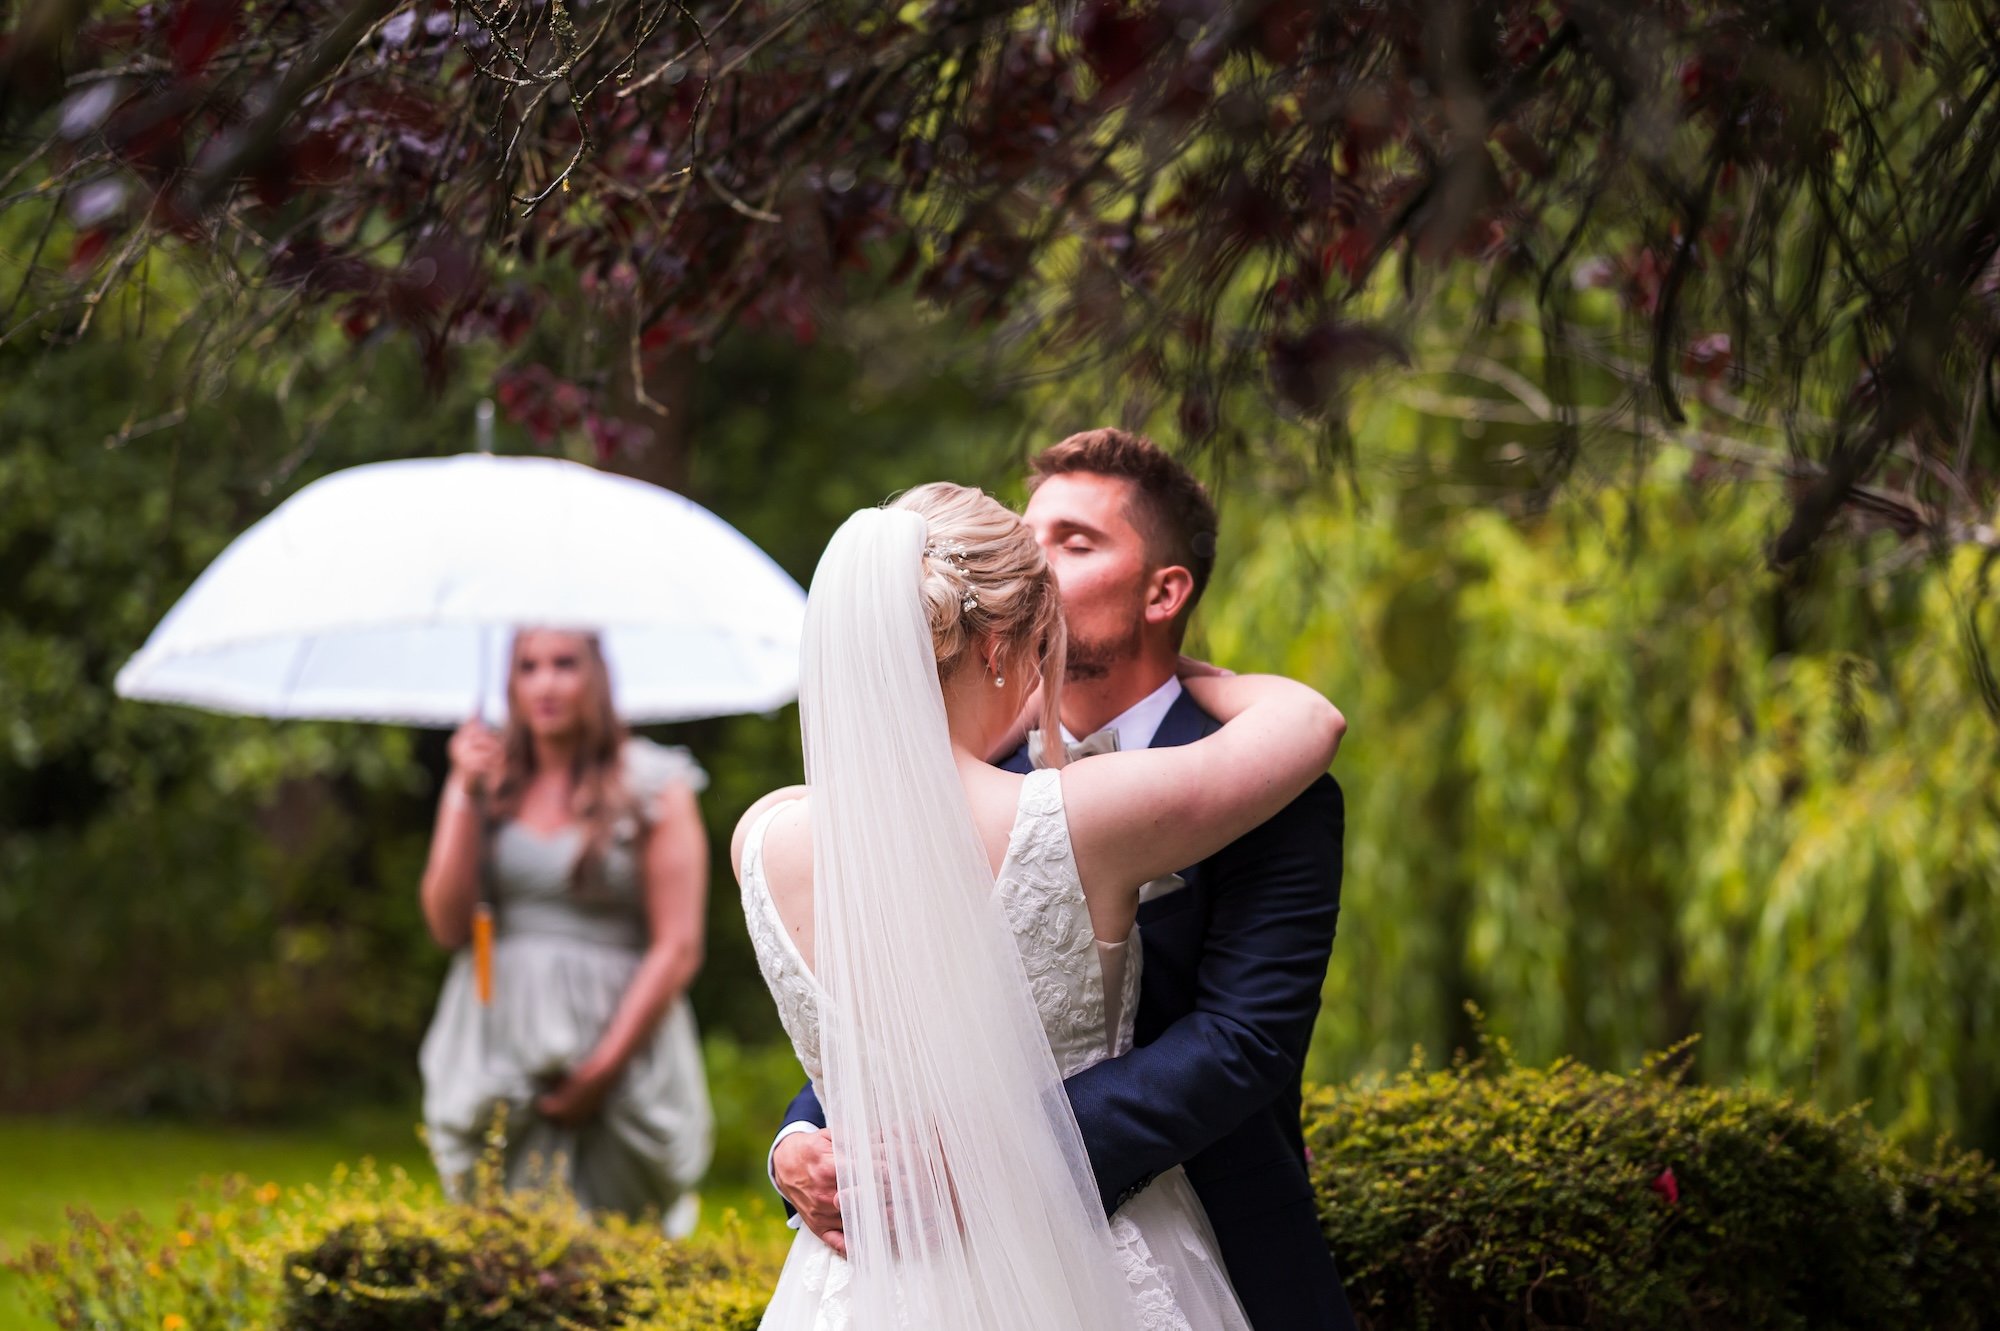 Candid portrait at The Mill Barns Wedding Venue